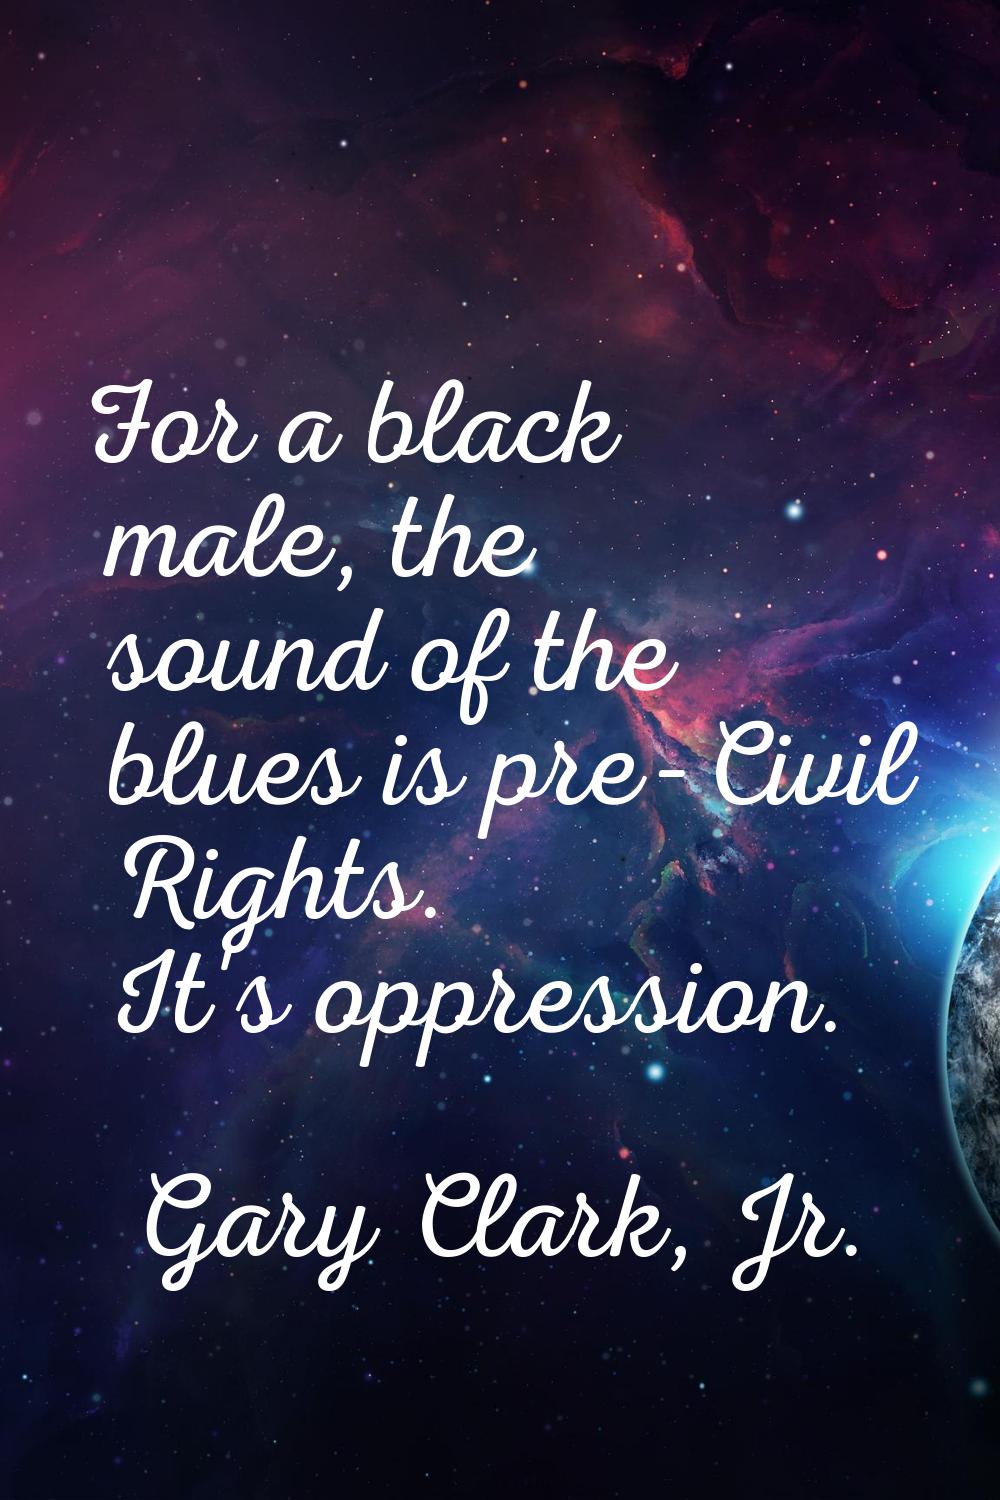 For a black male, the sound of the blues is pre-Civil Rights. It's oppression.